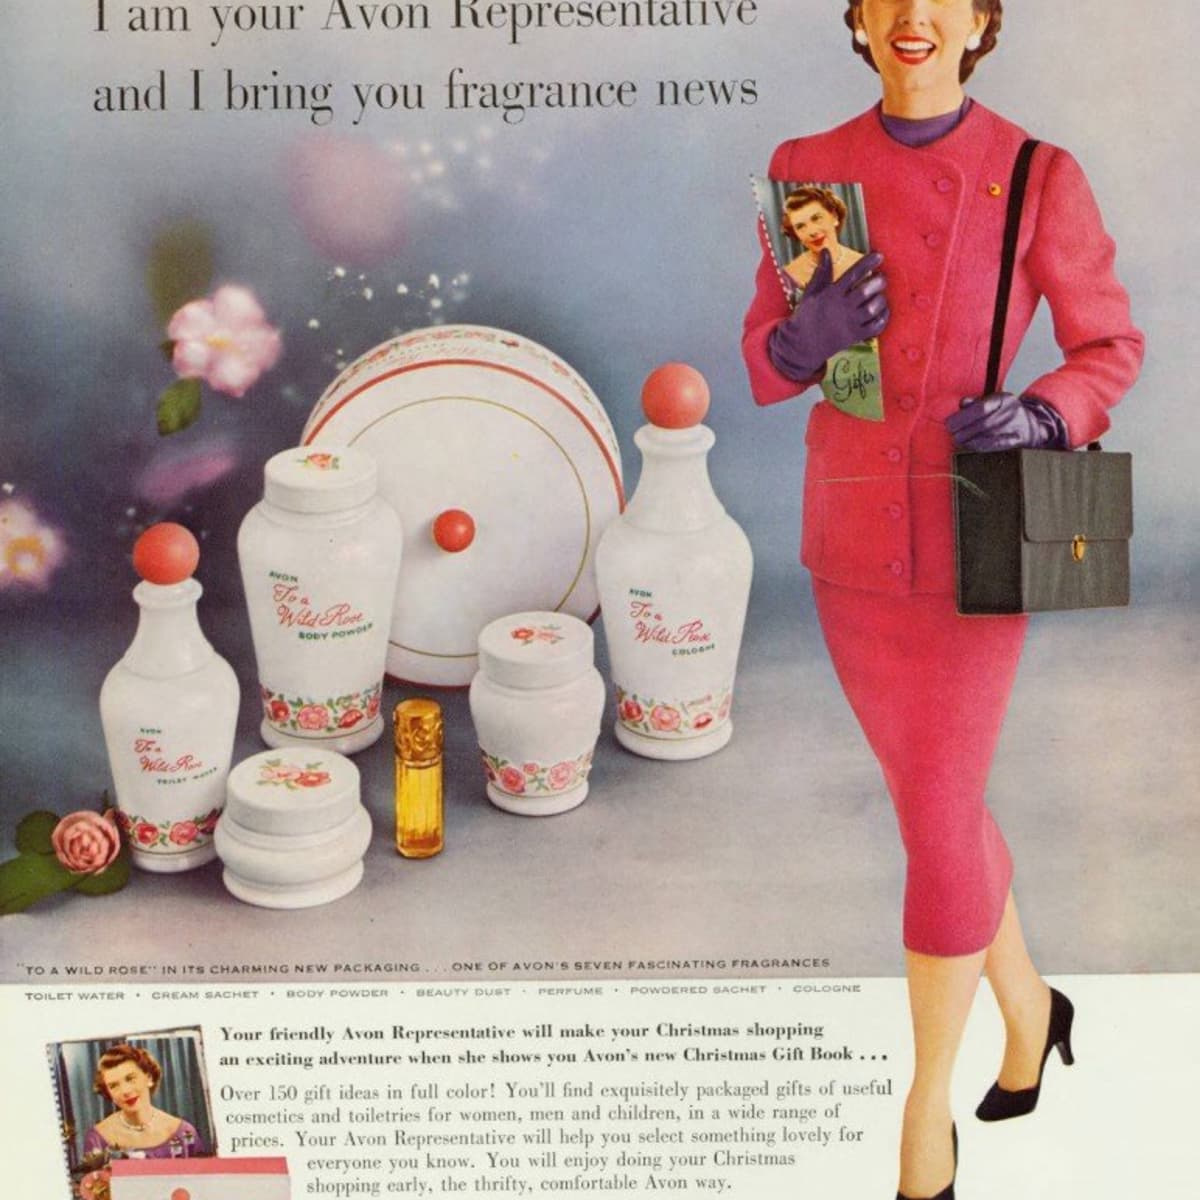 The Best of Avon: Top 5 Avon Vintage and Cult Classic Perfumes